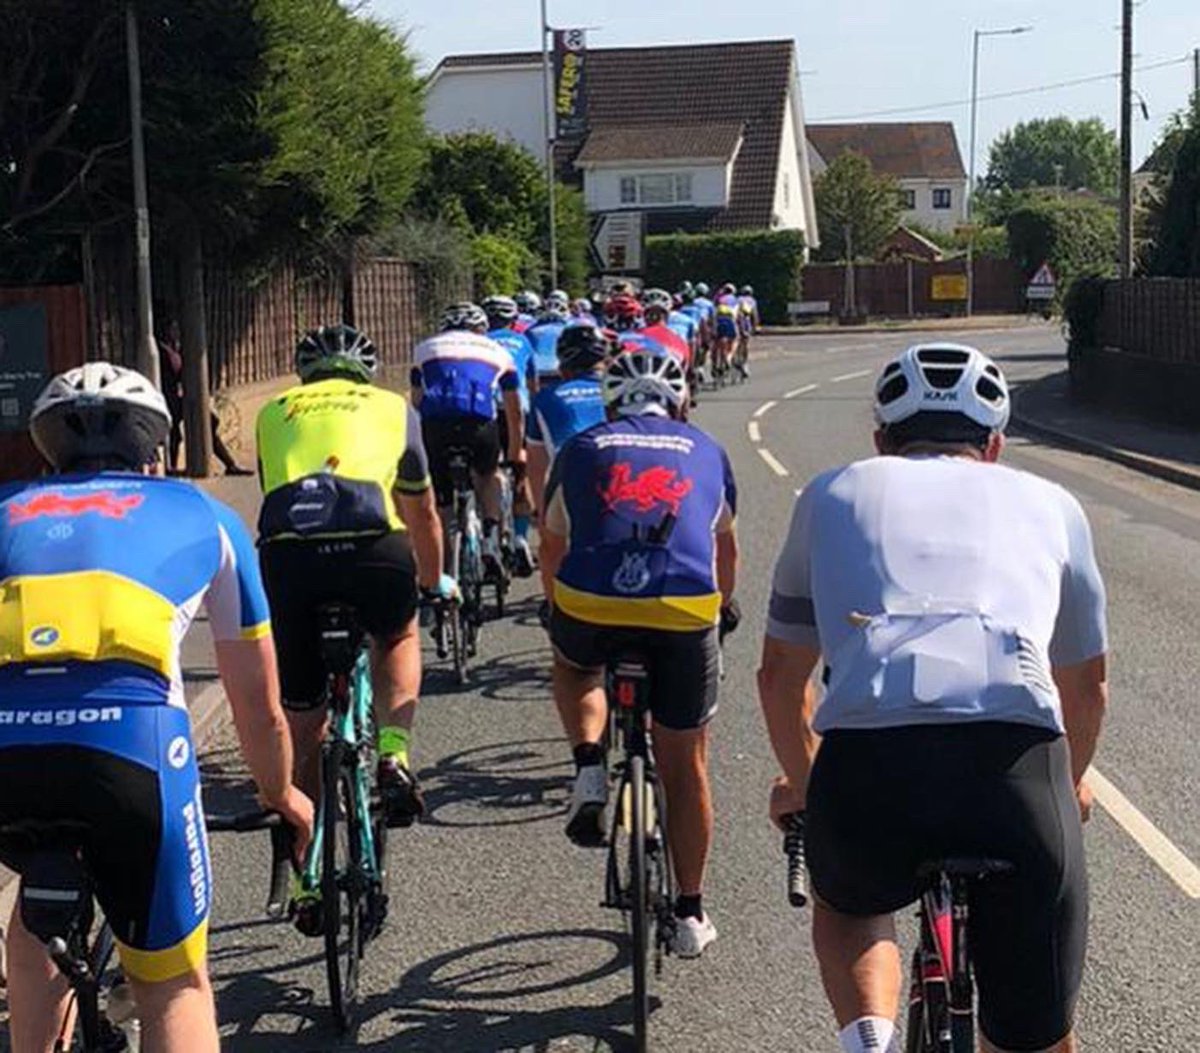 Brilliant to get to ride with @wenvoe_wheelers today, and as always had a great coffee at @FillStnTintern thanks to everyone that attended, and to @chunkiebailey & @robgoescycling for organising the ride 👏👏 #CwmcarnParagon #WenvoeWheelers #JointClubRide